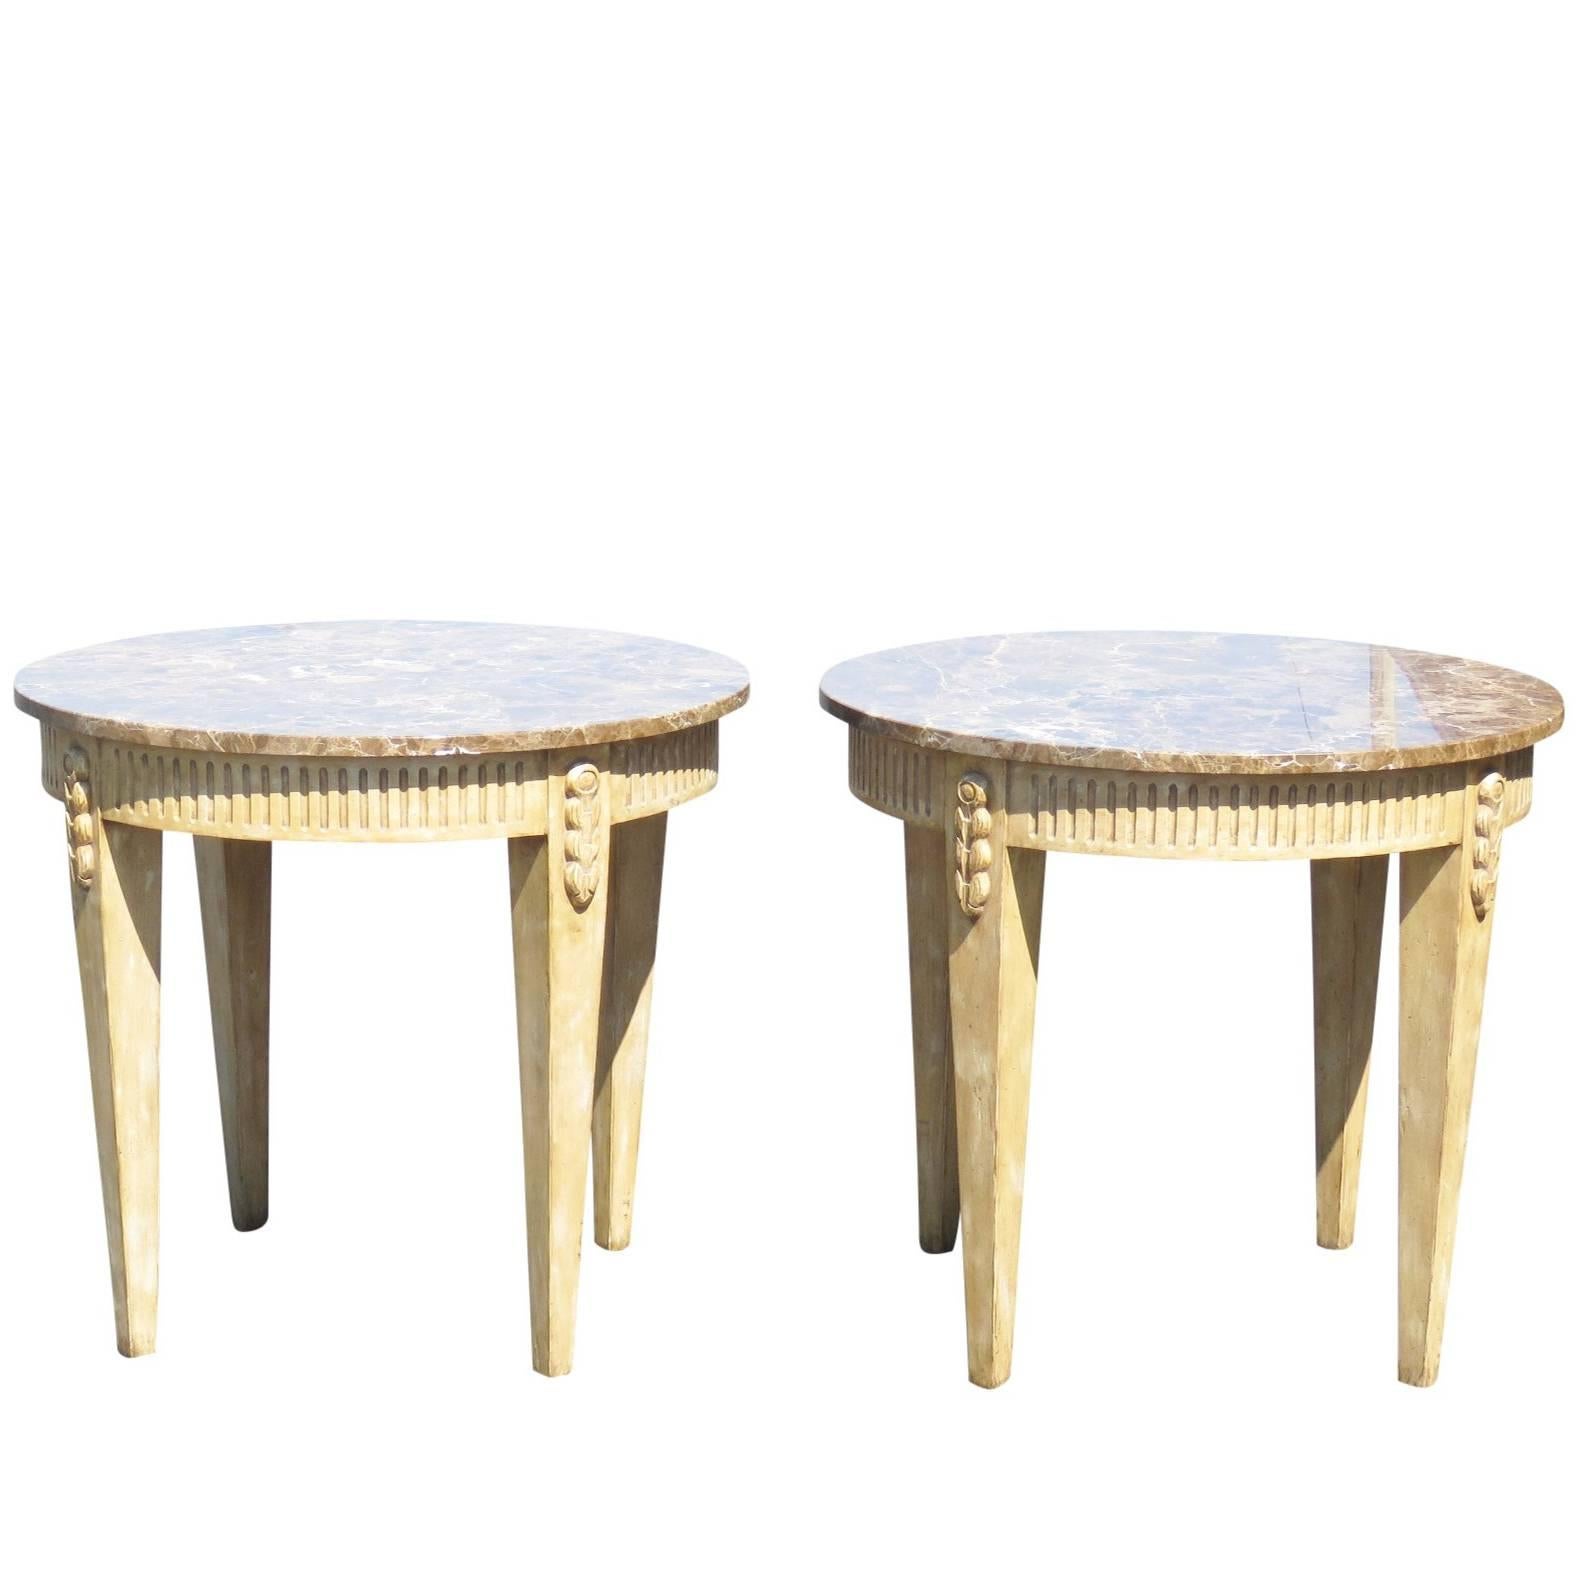 Pair of Directoire Style Marbletop Side Tables